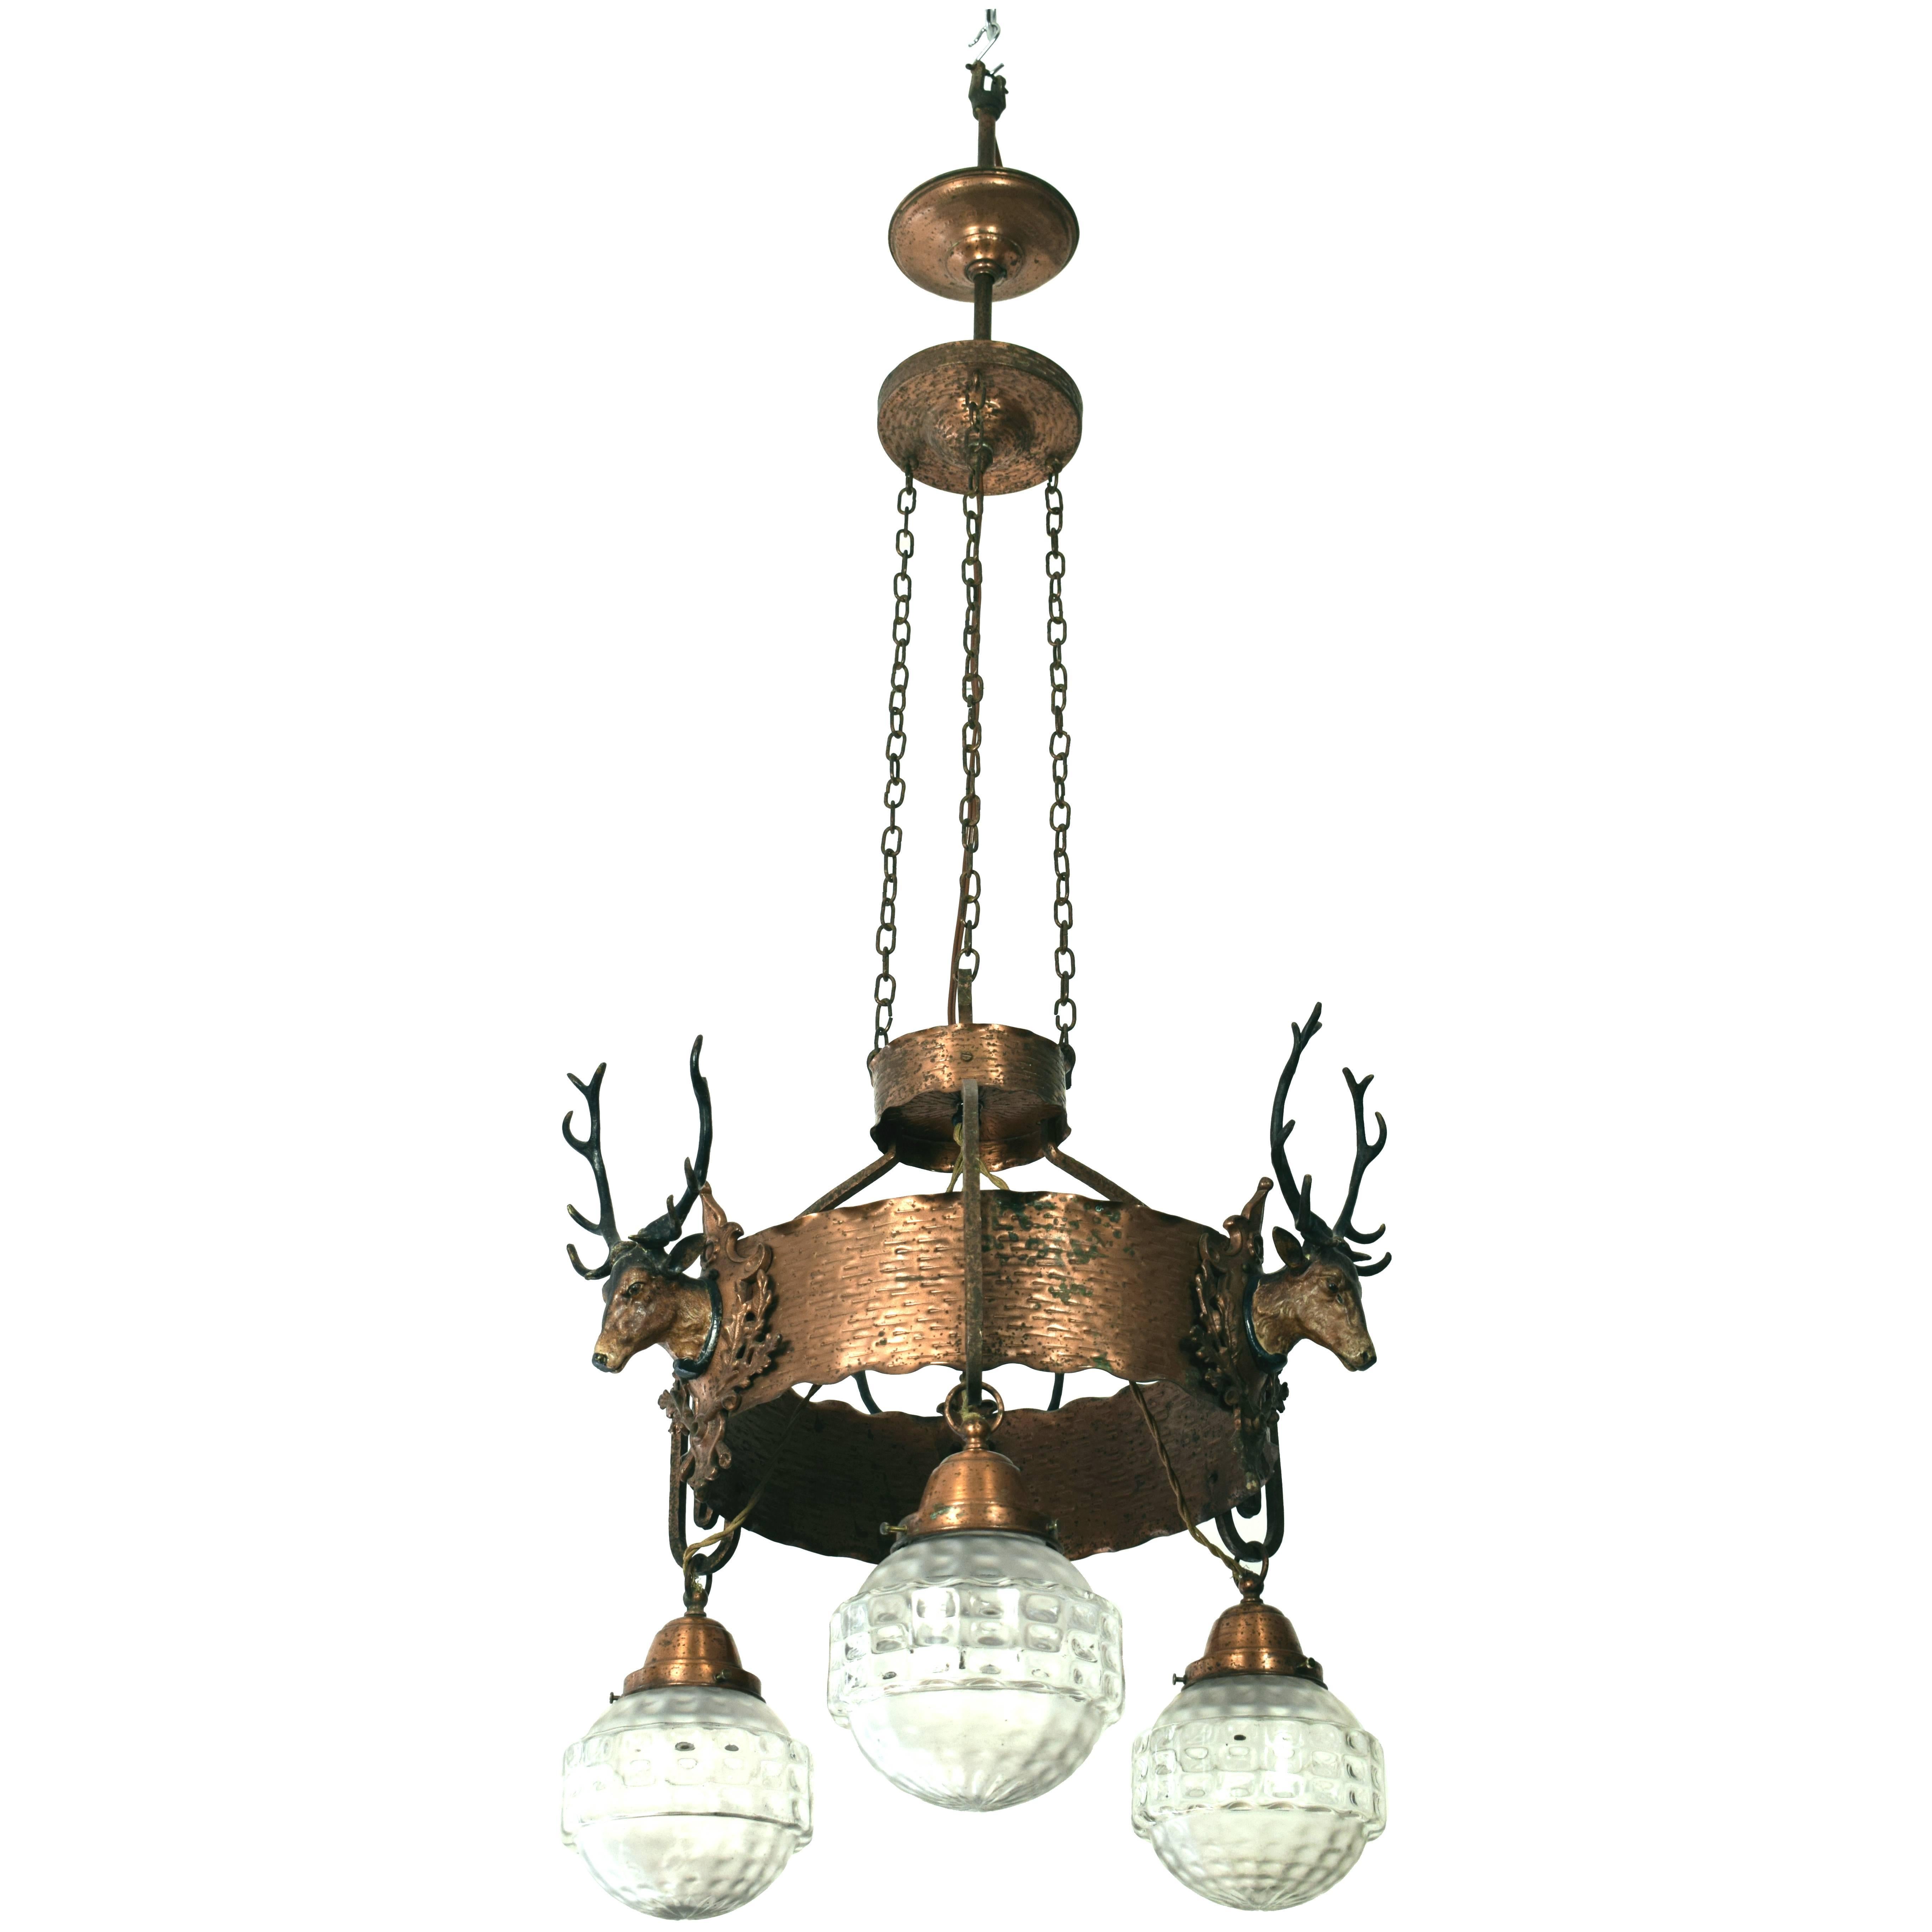 Exquisite Chandelier of an Austrian Hunting Lodge